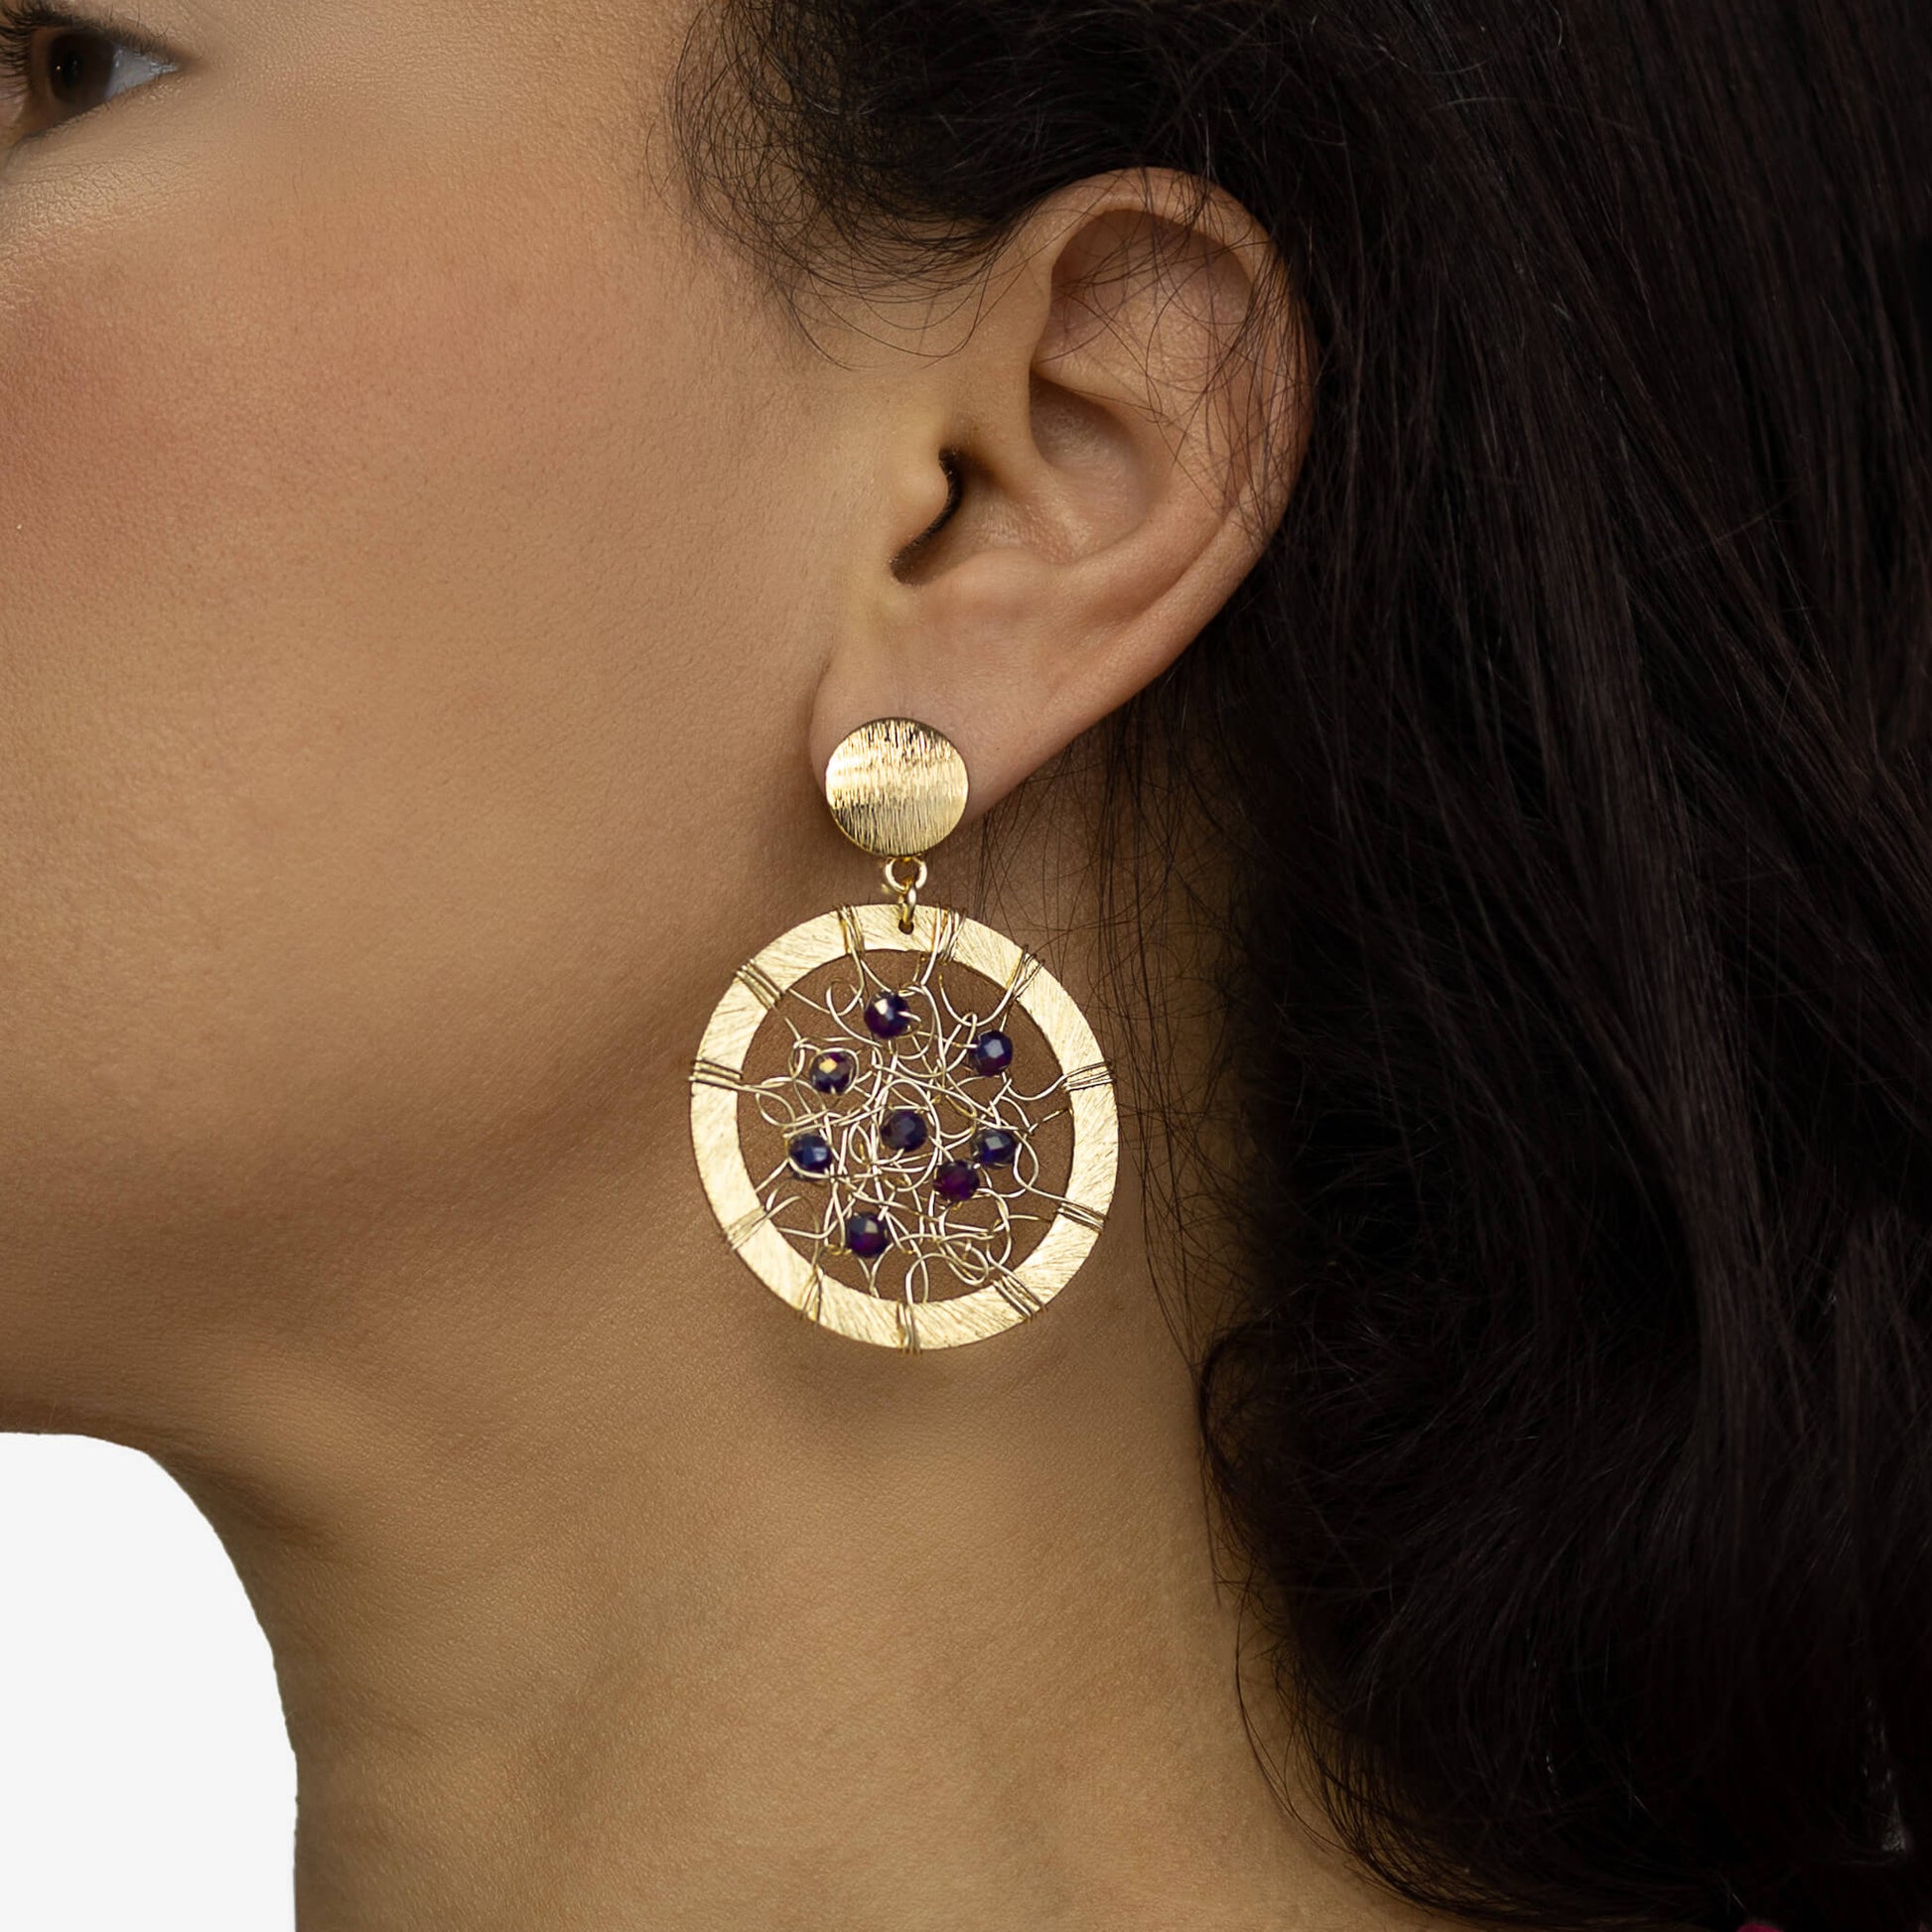 Janya Earrings on a model. Gold Color Wire Wrapped Earrings. Stud Earrings with Metallic Purple Crystal Beads Accent.